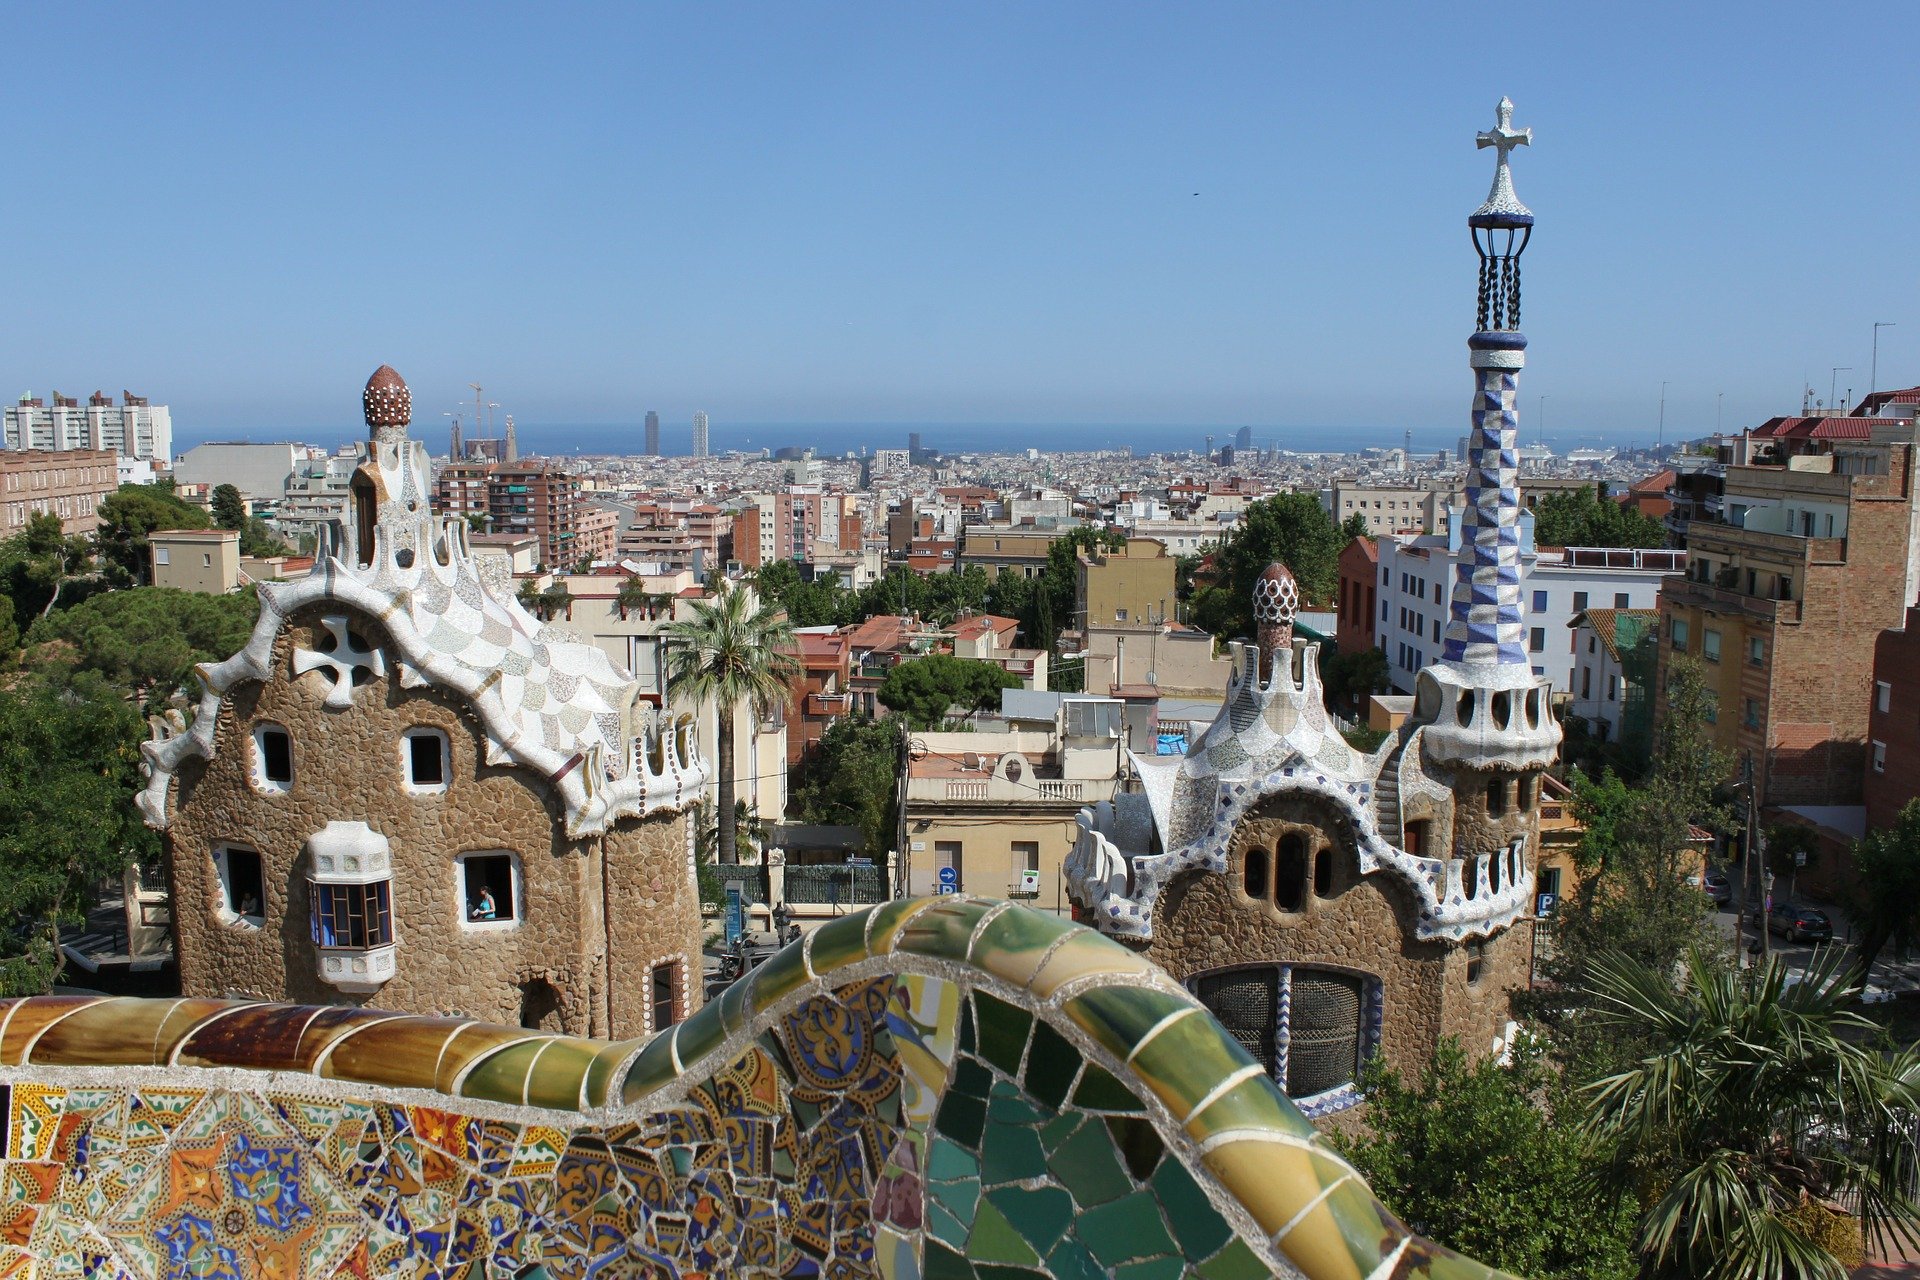 Parc guell 332390 1920